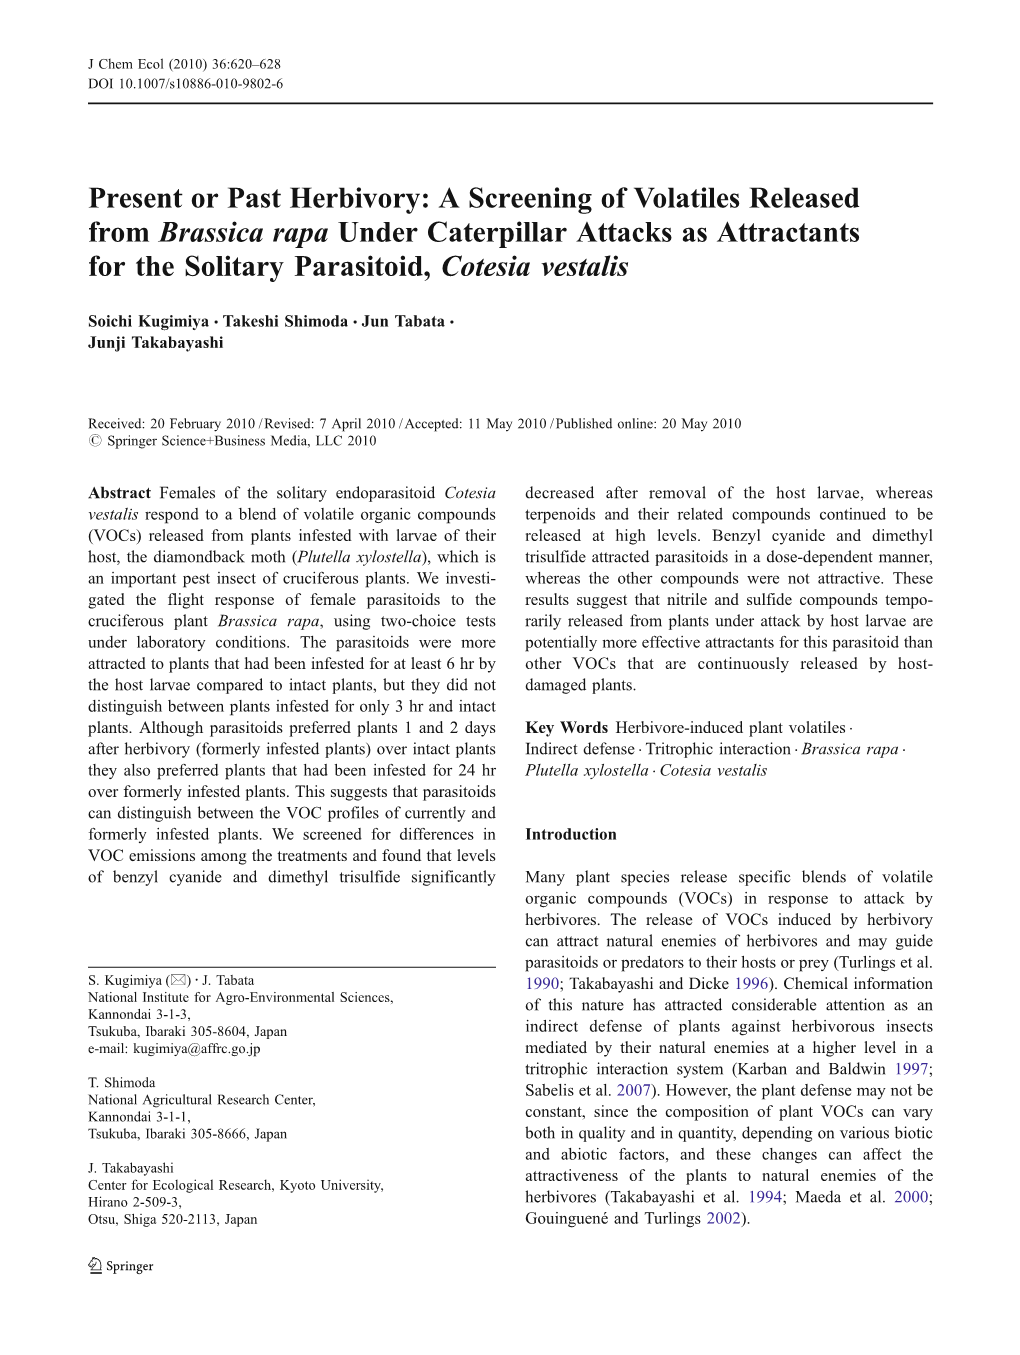 Present Or Past Herbivory: a Screening of Volatiles Released from Brassica Rapa Under Caterpillar Attacks As Attractants for the Solitary Parasitoid, Cotesia Vestalis